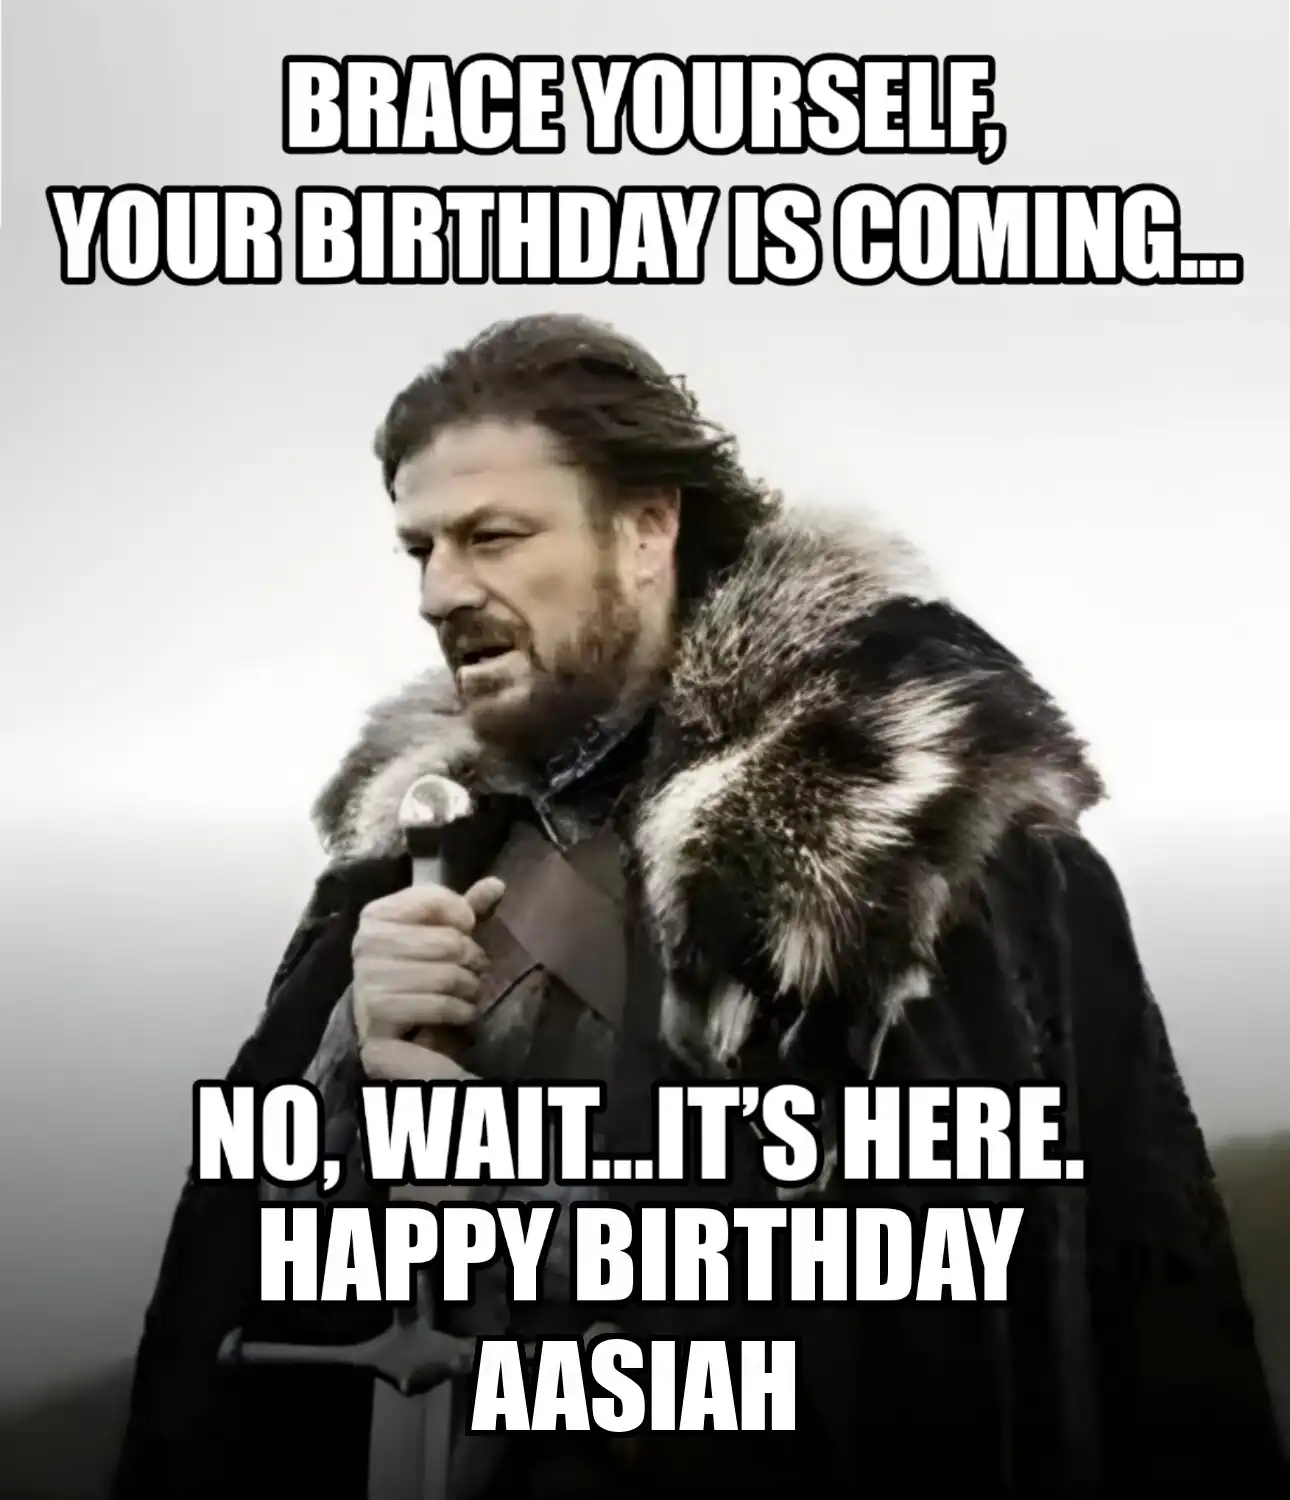 Happy Birthday Aasiah Brace Yourself Your Birthday Is Coming Meme